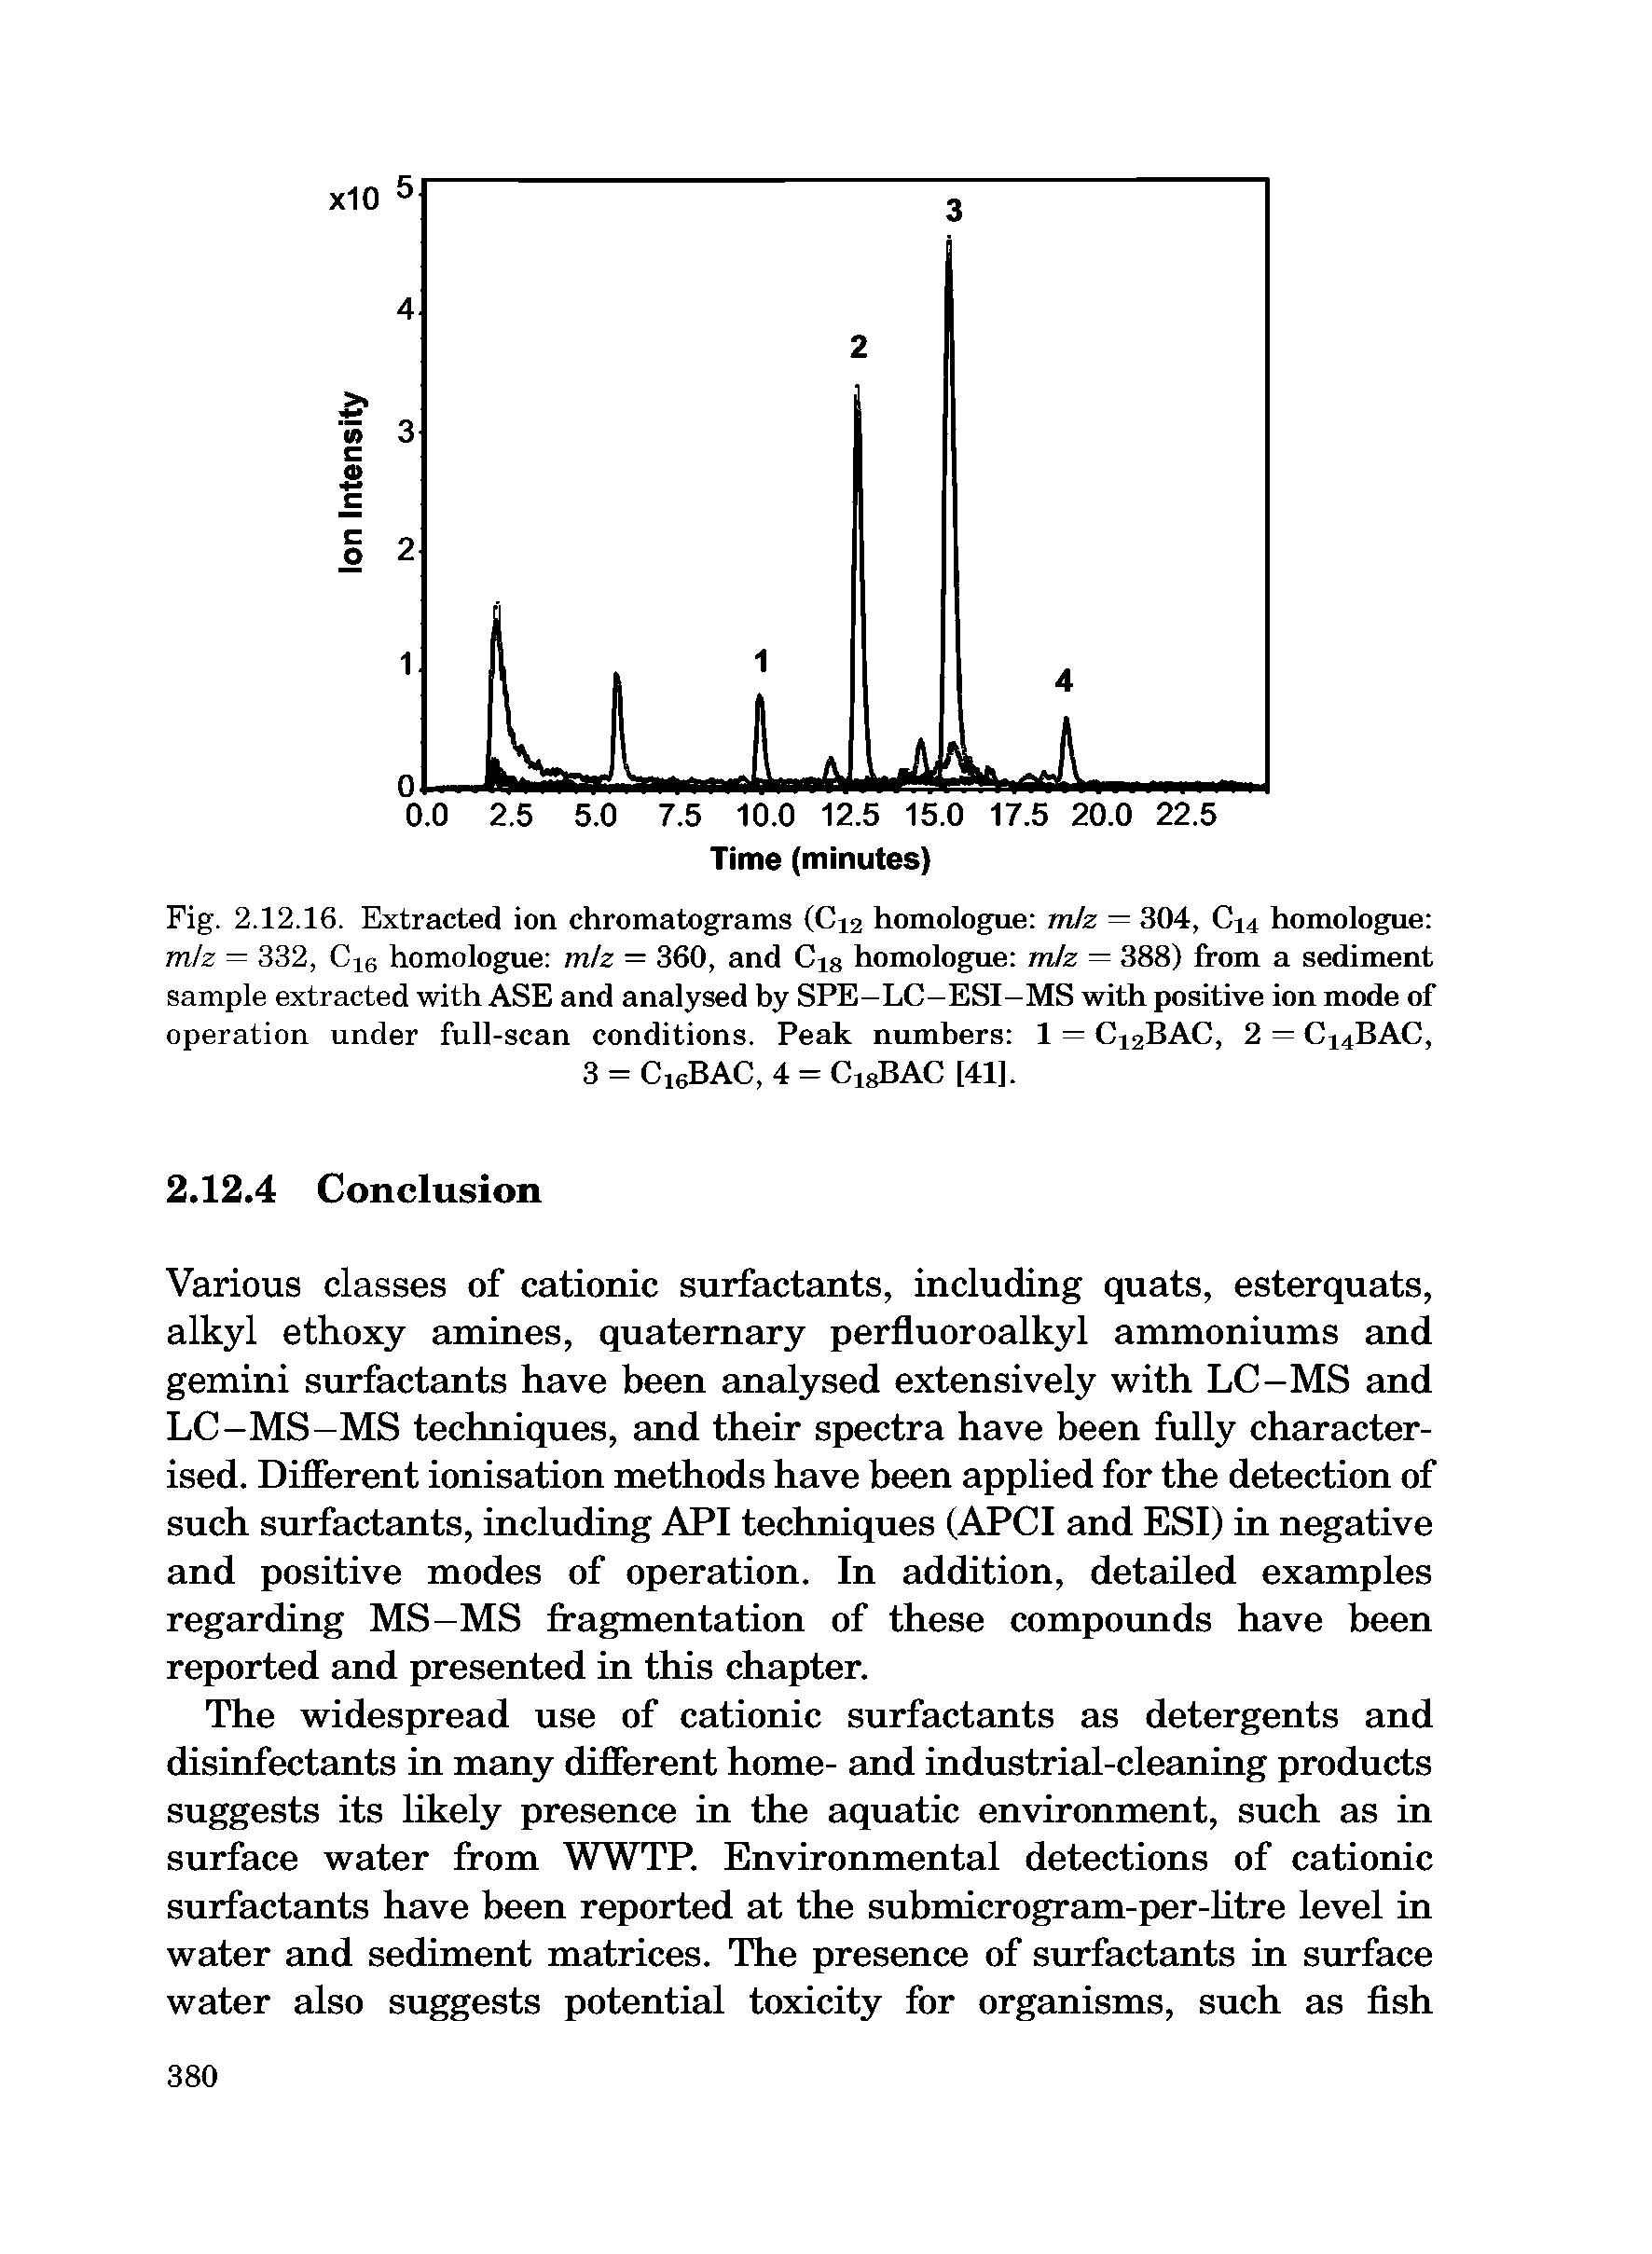 Fig. 2.12.16. Extracted ion chromatograms (C12 homologue m z = 304, C14 homologue m/z — 332, C1B homologue mlz = 360, and Cig homologue mJz — 388) from a sediment sample extracted with ASE and analysed by SPE-LC-ESI-MS with positive ion mode of operation under full-scan conditions. Peak numbers 1 = C12BAC, 2 = C14BAC, 3 = C16BAC, 4 = C18BAC [41].